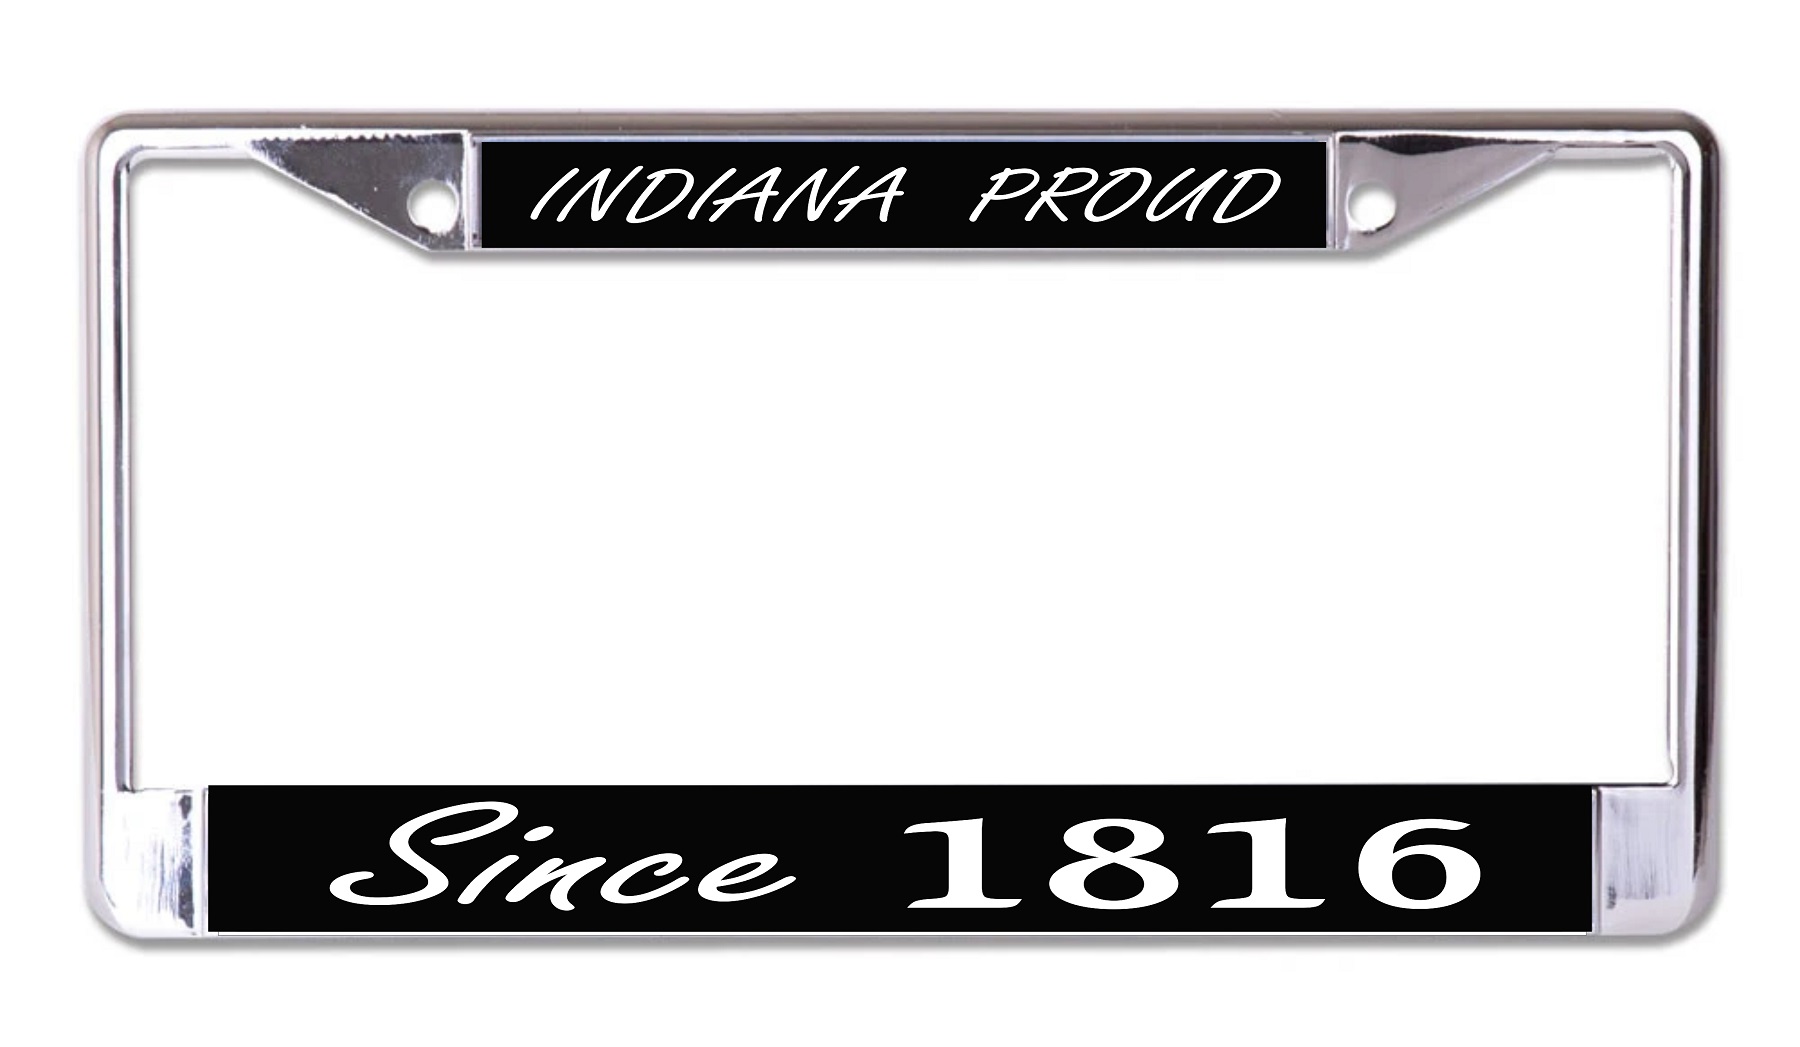 Indiana Proud Since 1816 Chrome License Plate FRAME